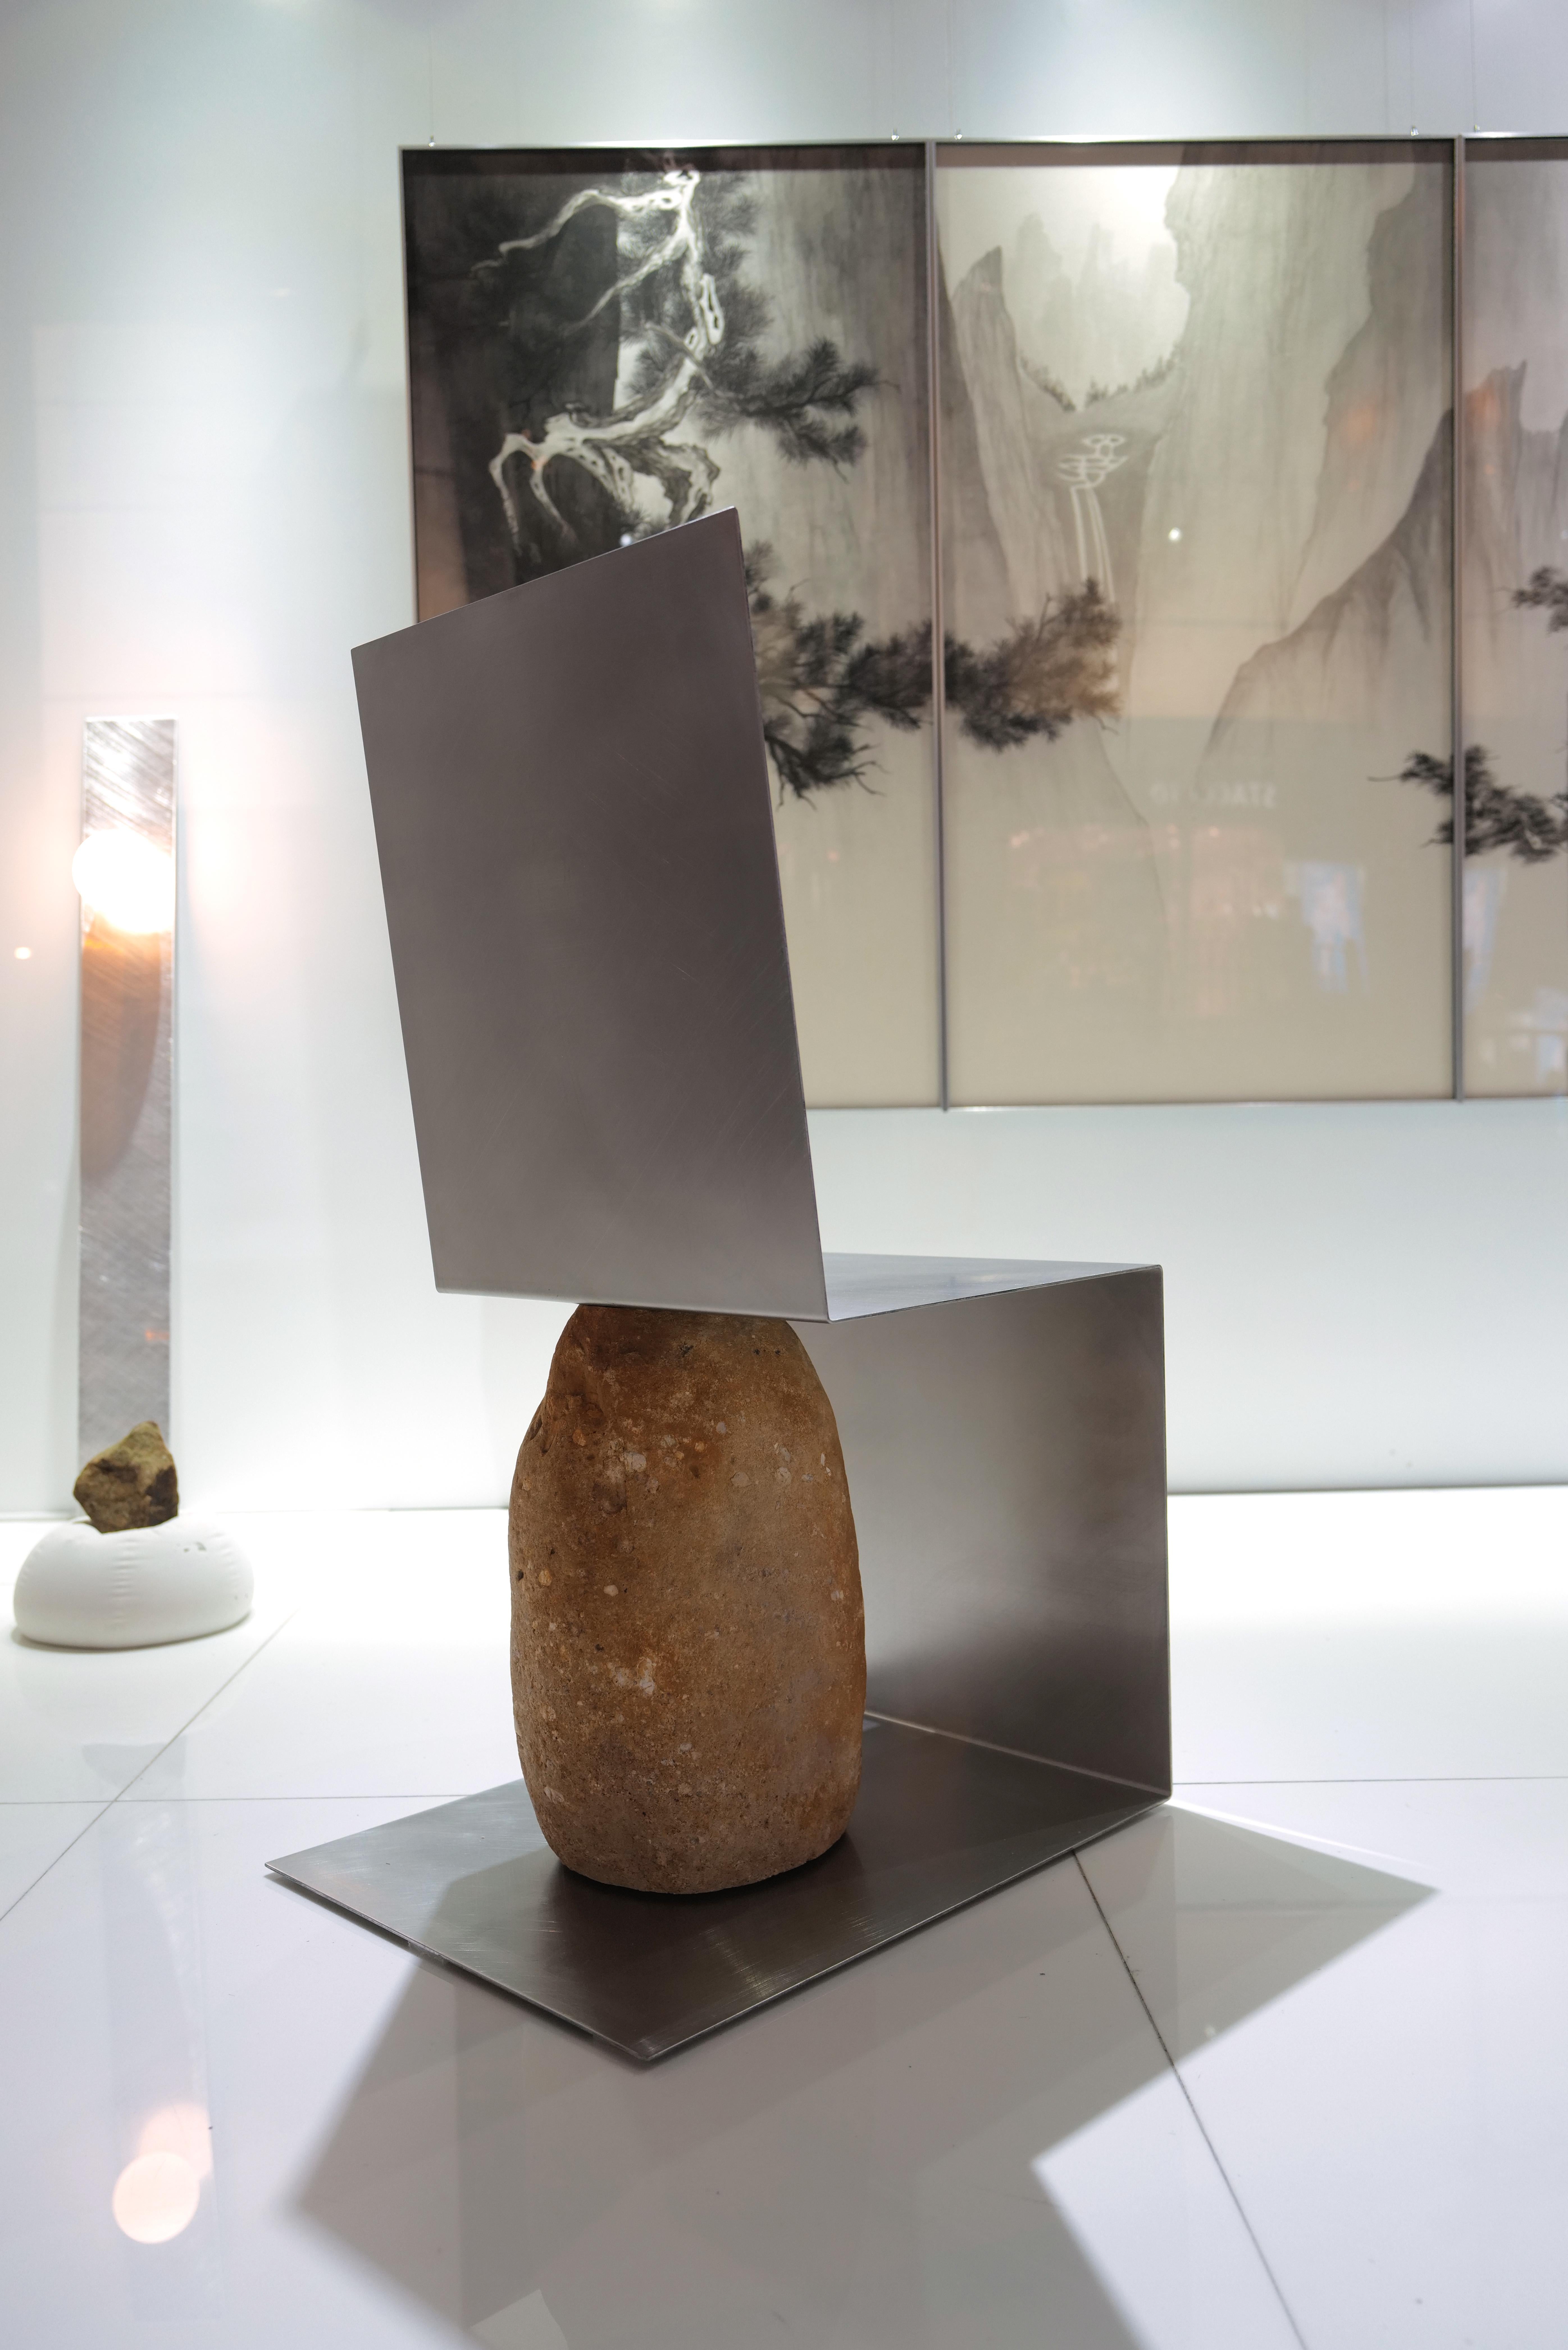 Hong Kong Steel and Stone Chair by Batten and Kamp